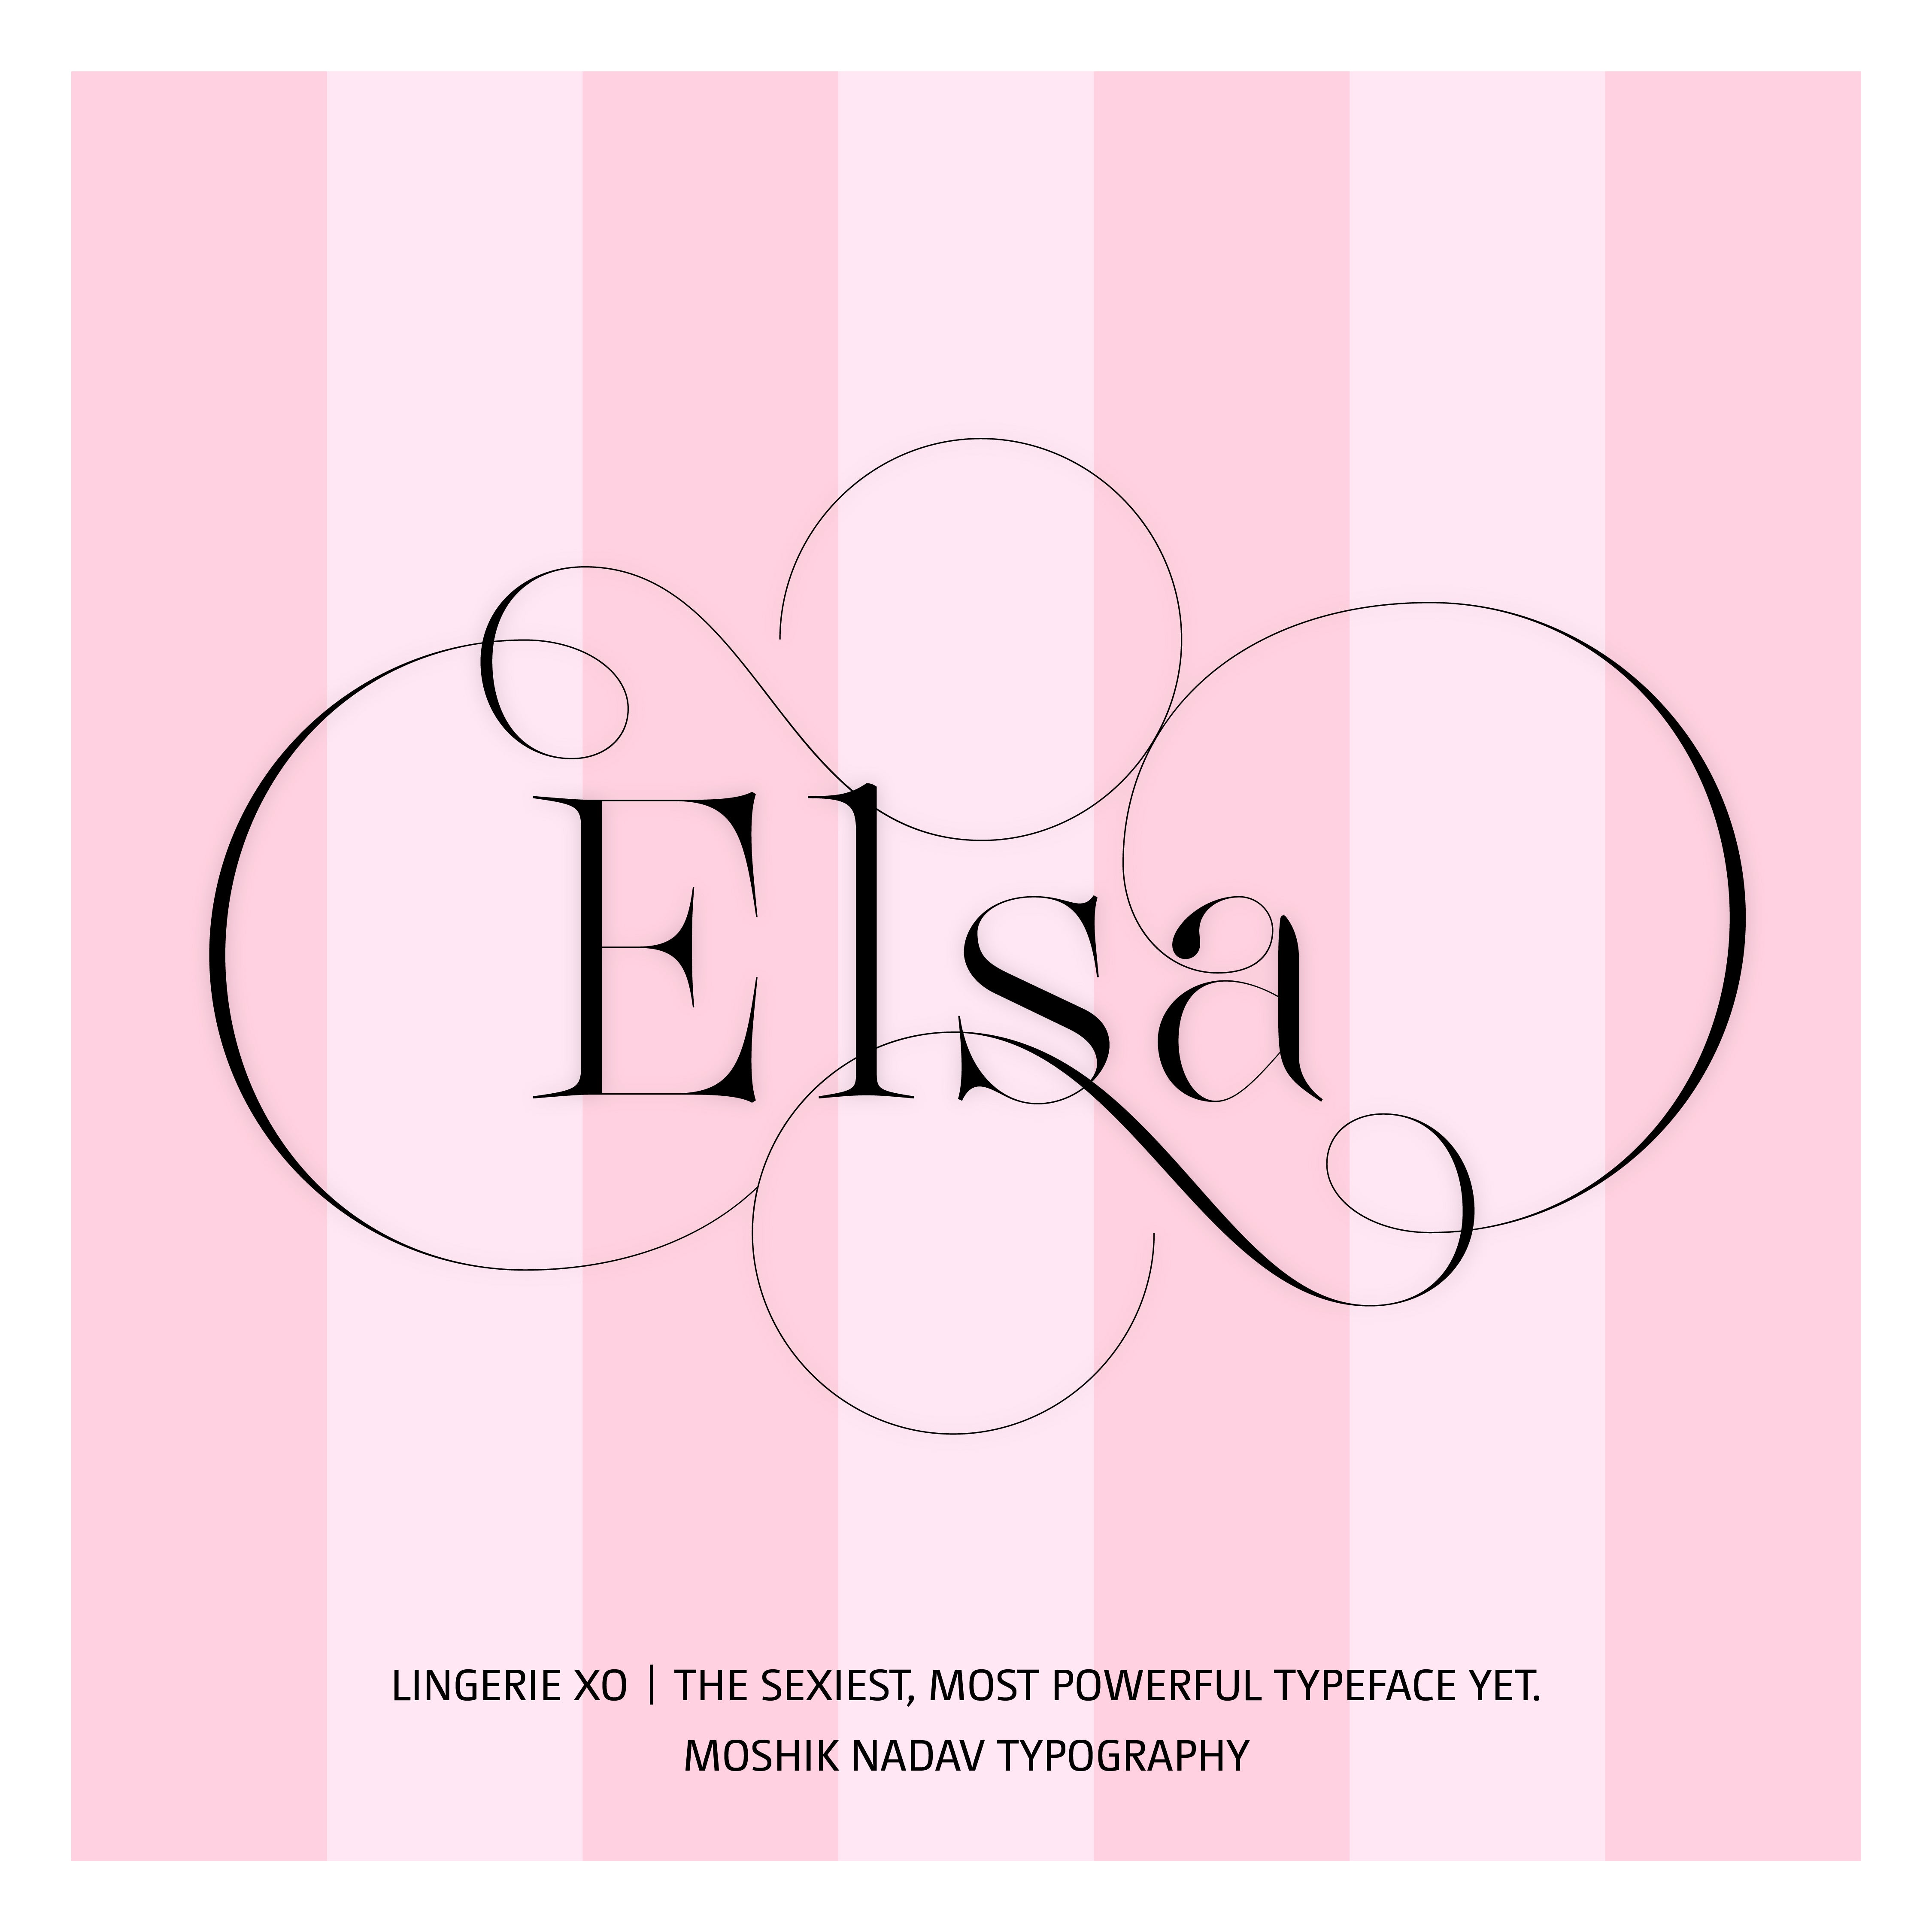 Elsa Hosk poster - designed with the sexy font Lingerie XO by Moshik Nadav Fashion Typography NYC